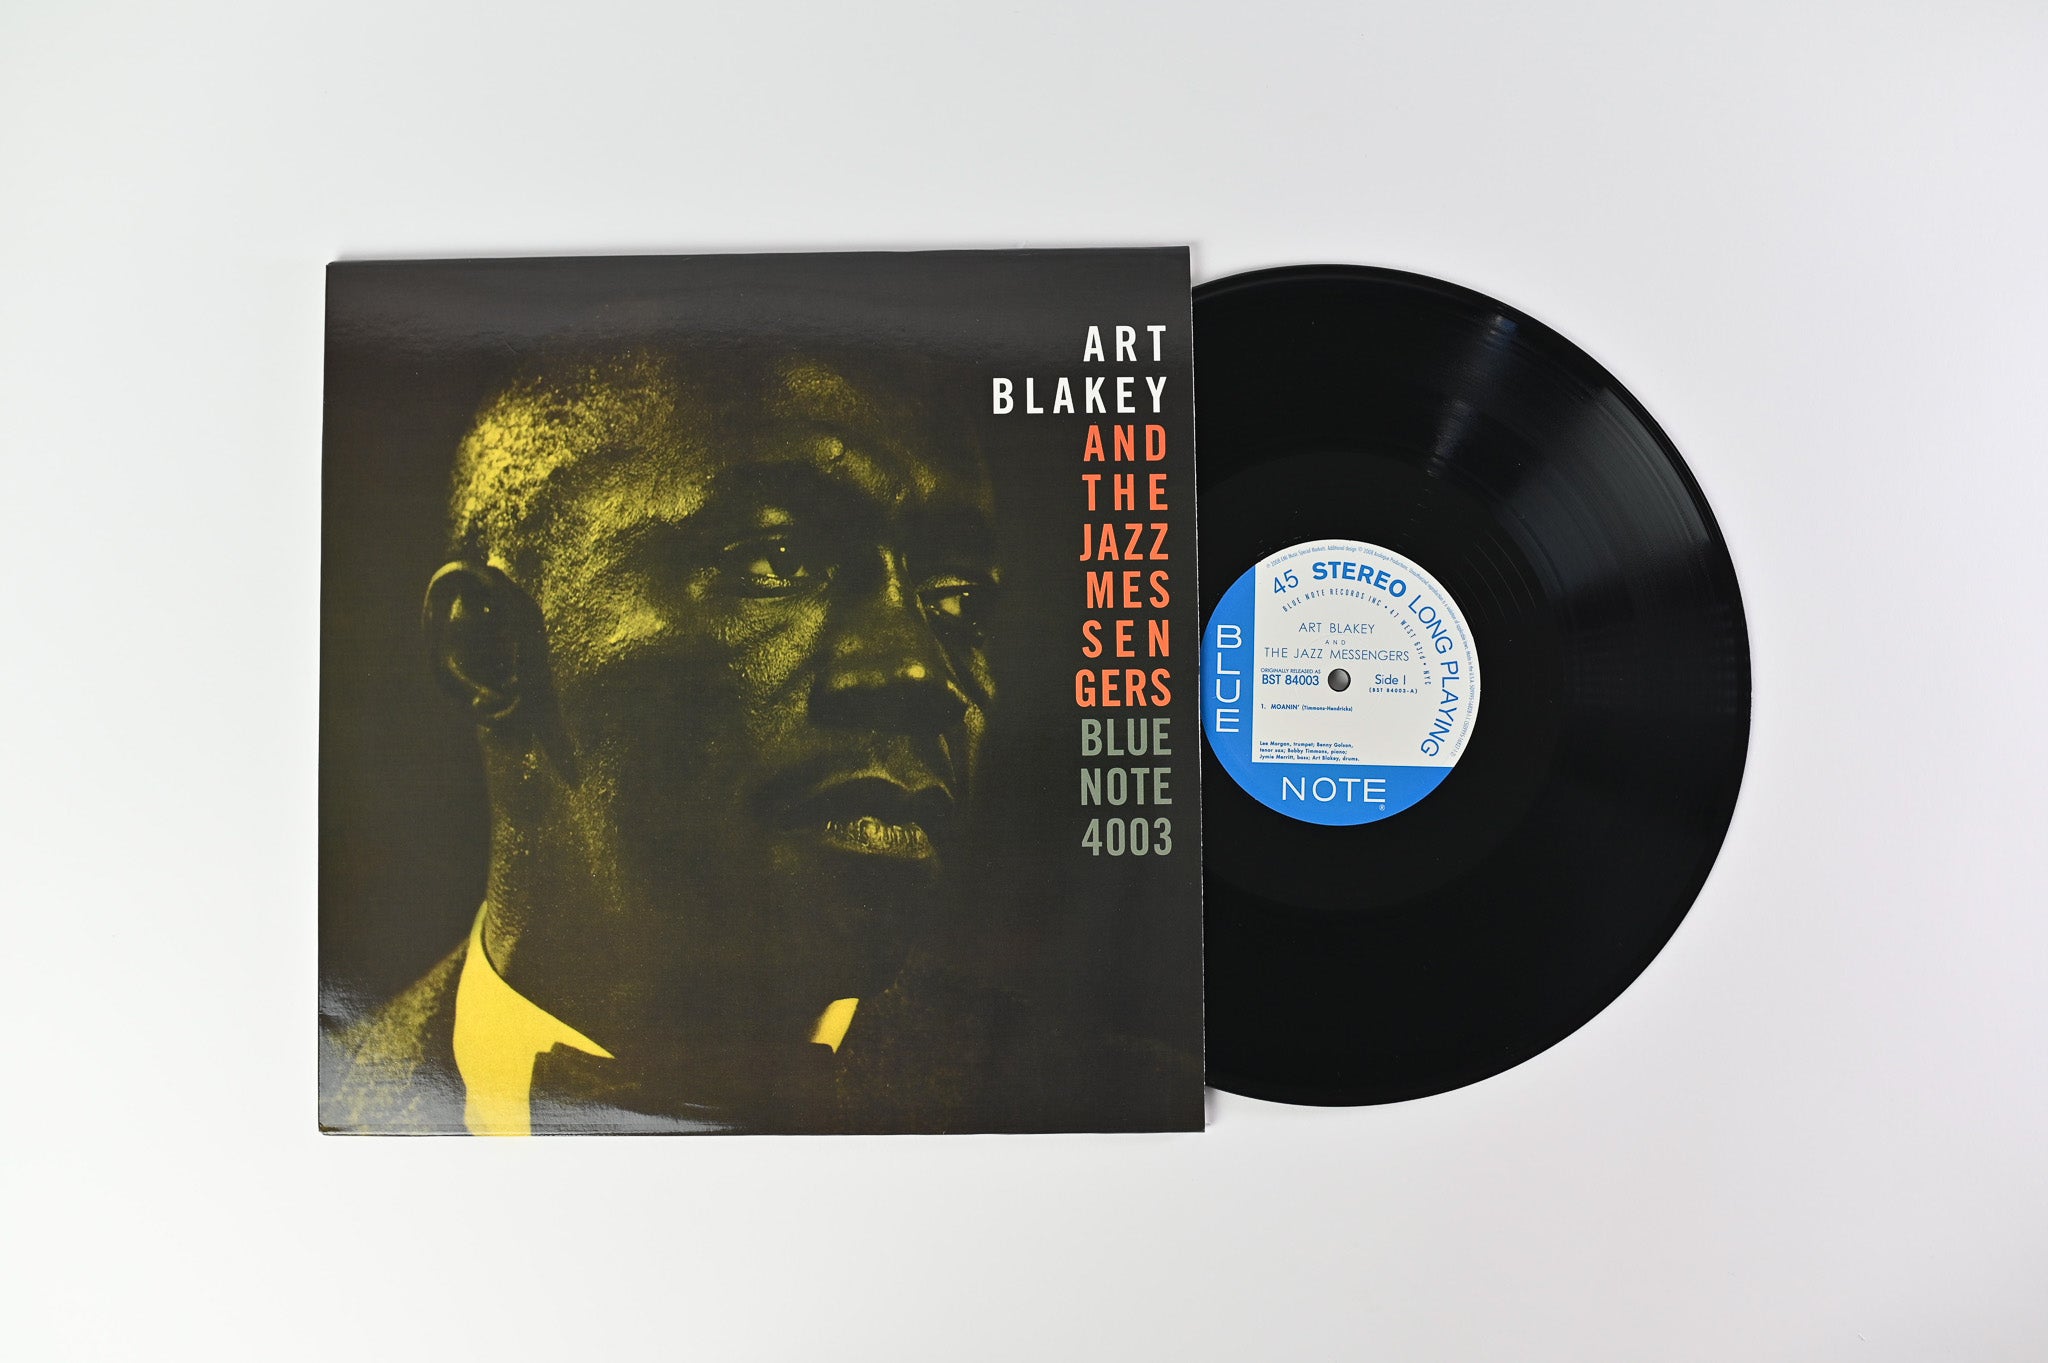 Art Blakey & The Jazz Messengers - Moanin' on Blue Note Analogue Productions Reissue 45 RPM